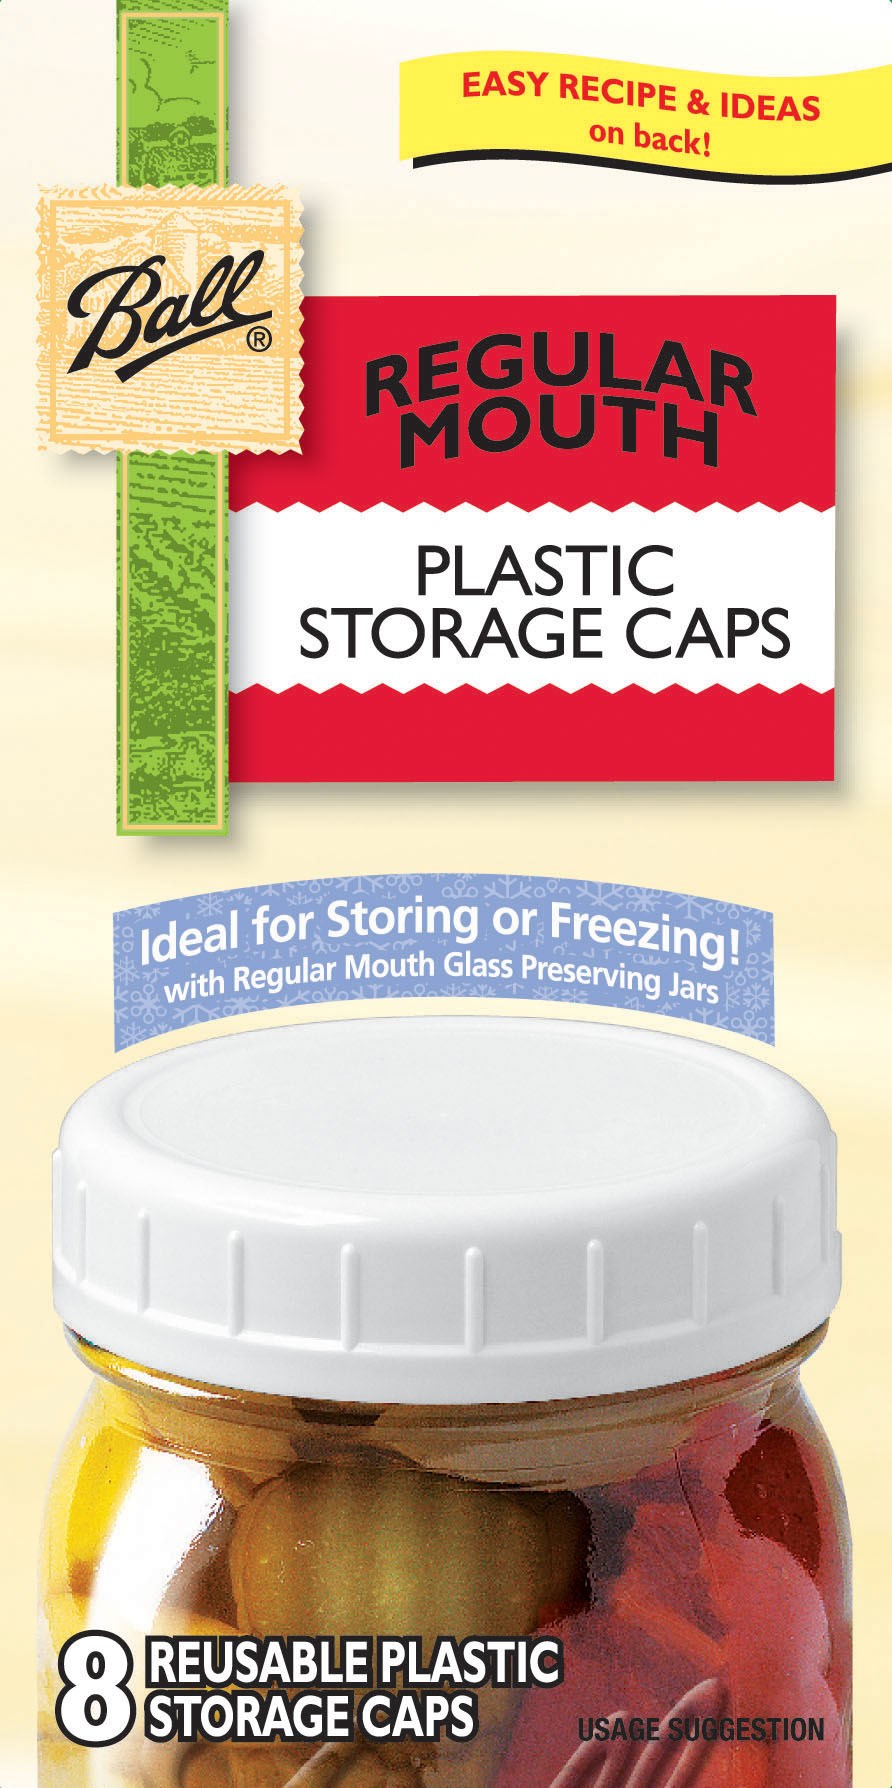 Ball, Ball 36010 Regular Mouth Plastic Storage Caps 8 Count